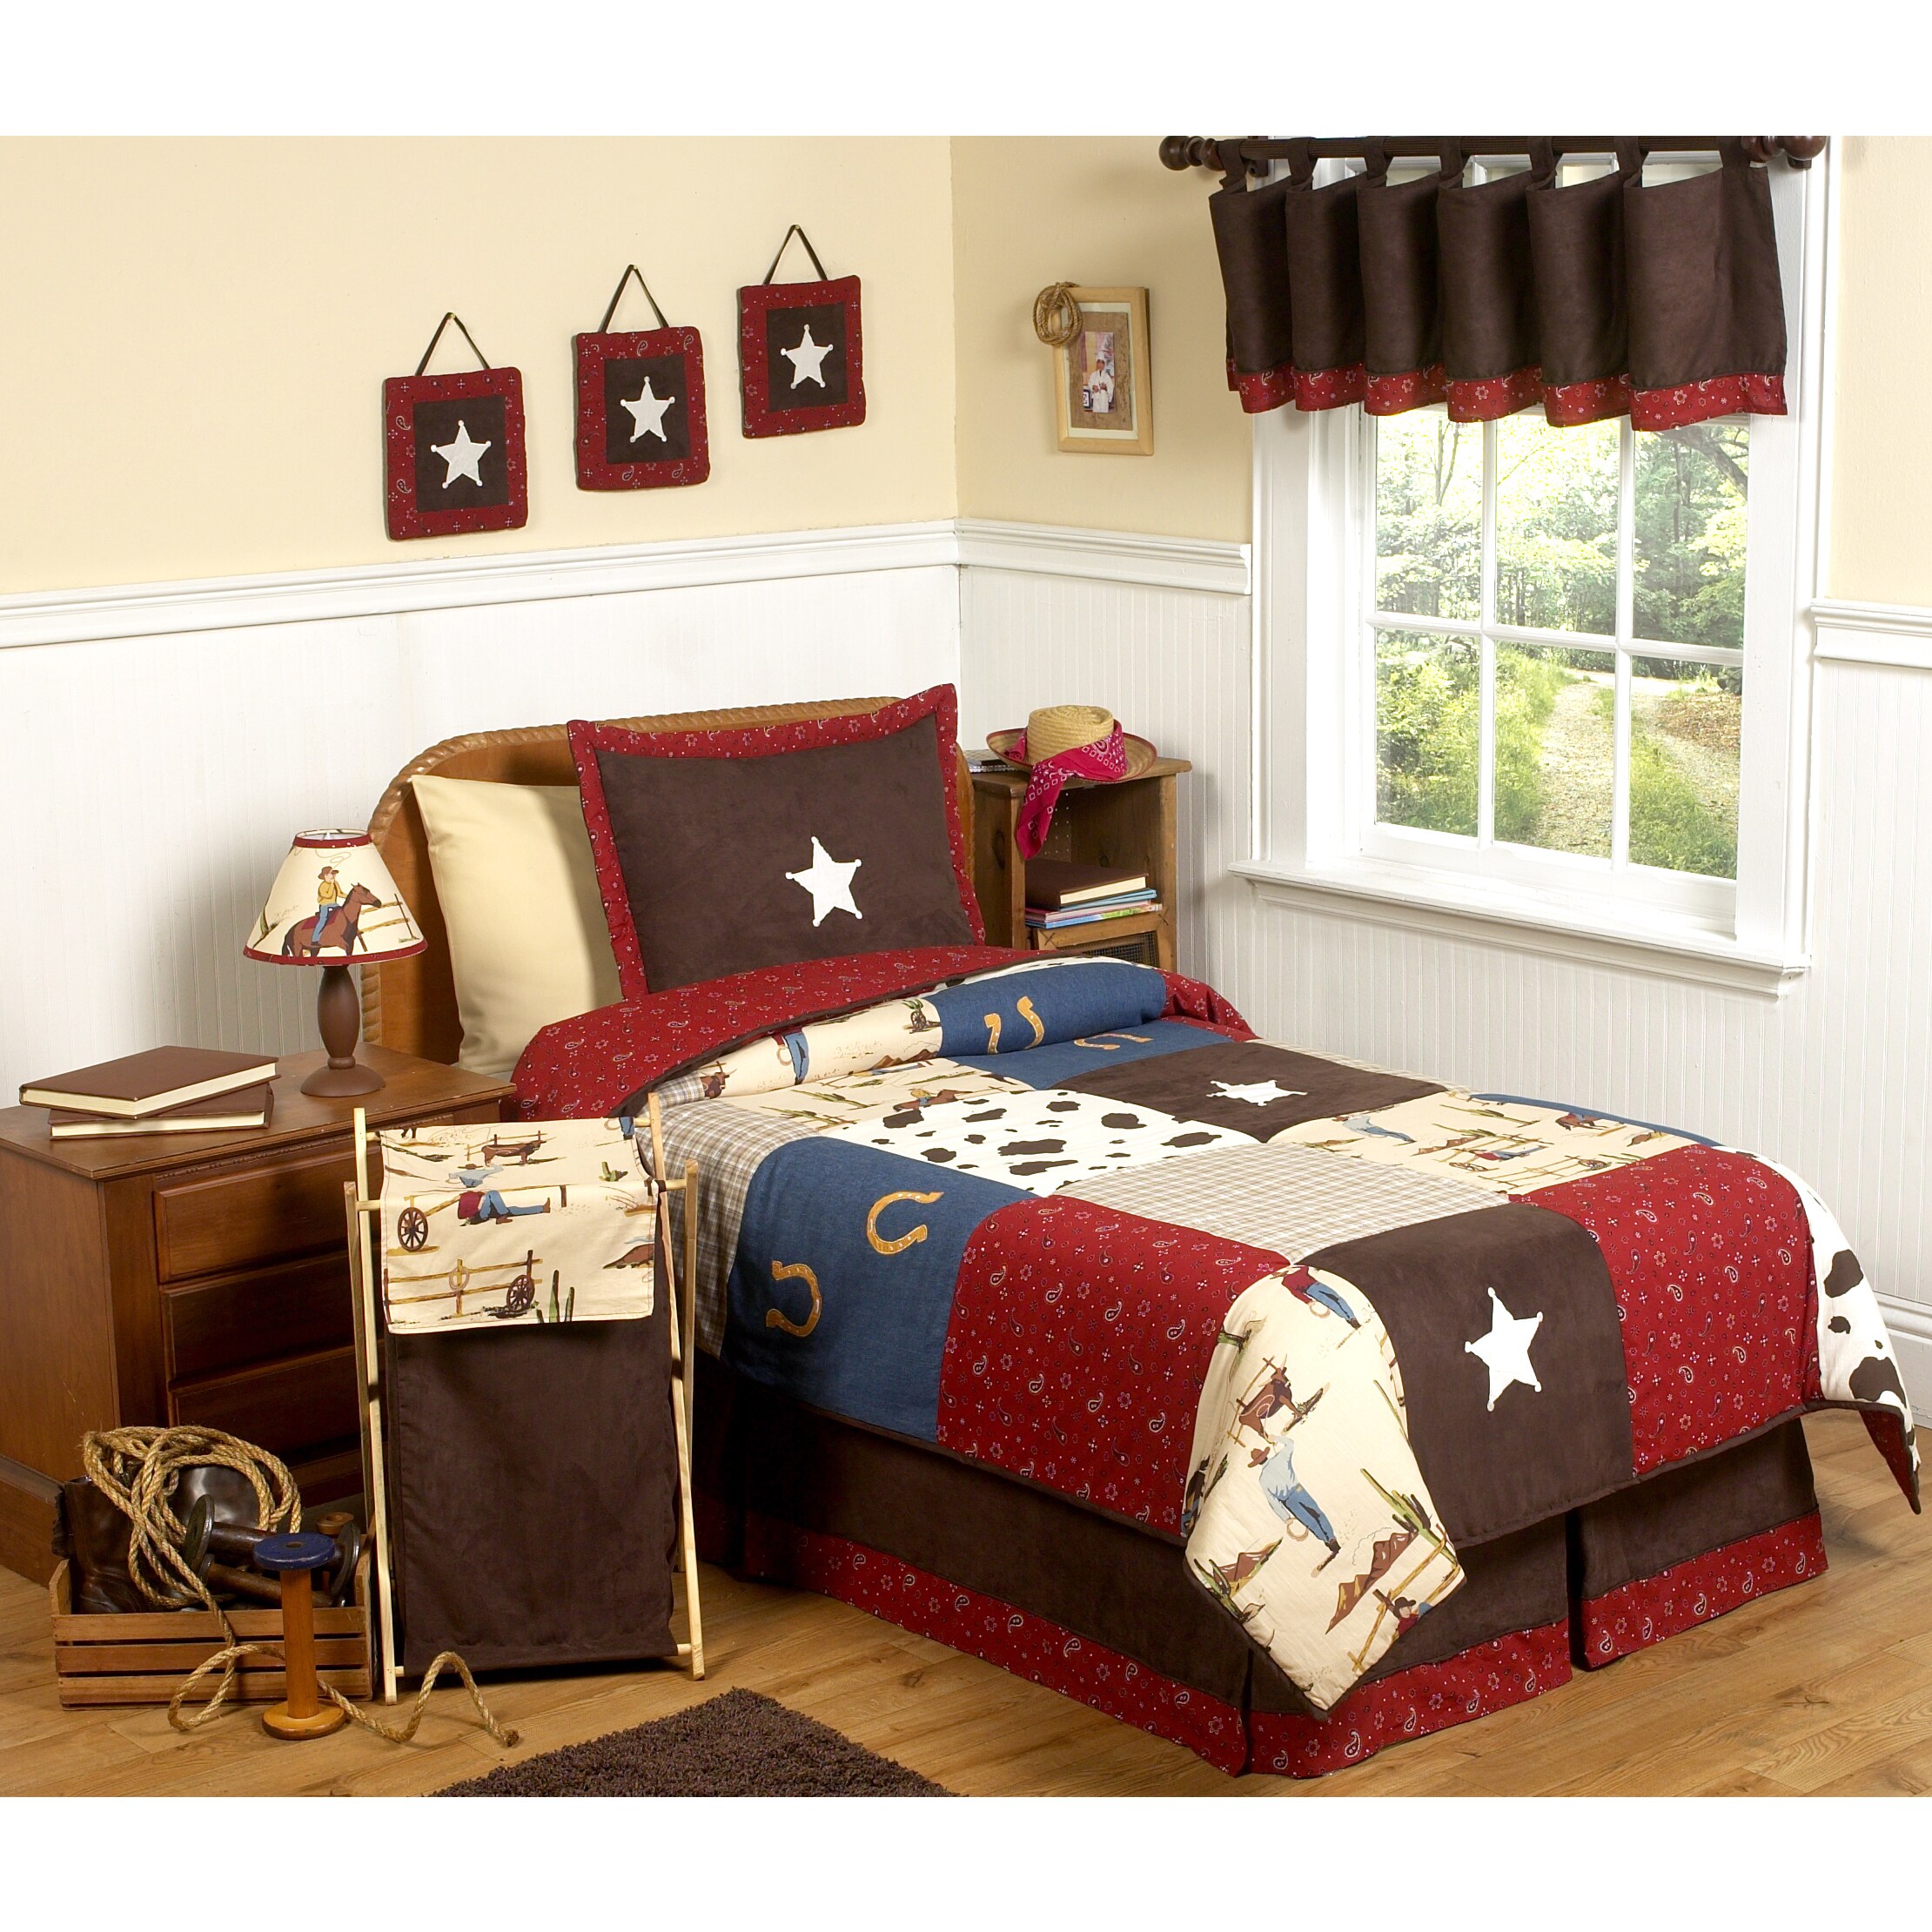 Sweet Jojo Designs Boys Wild West Cowboy 4 piece Twin Comforter Set (Red/ chocolate brown/ camel/ blue/ goldMaterials 100 percent cotton, microsuede fabricsFill material PolyesterCare instructions Machine washableBrand Sweet Jojo DesignsComforter 62 